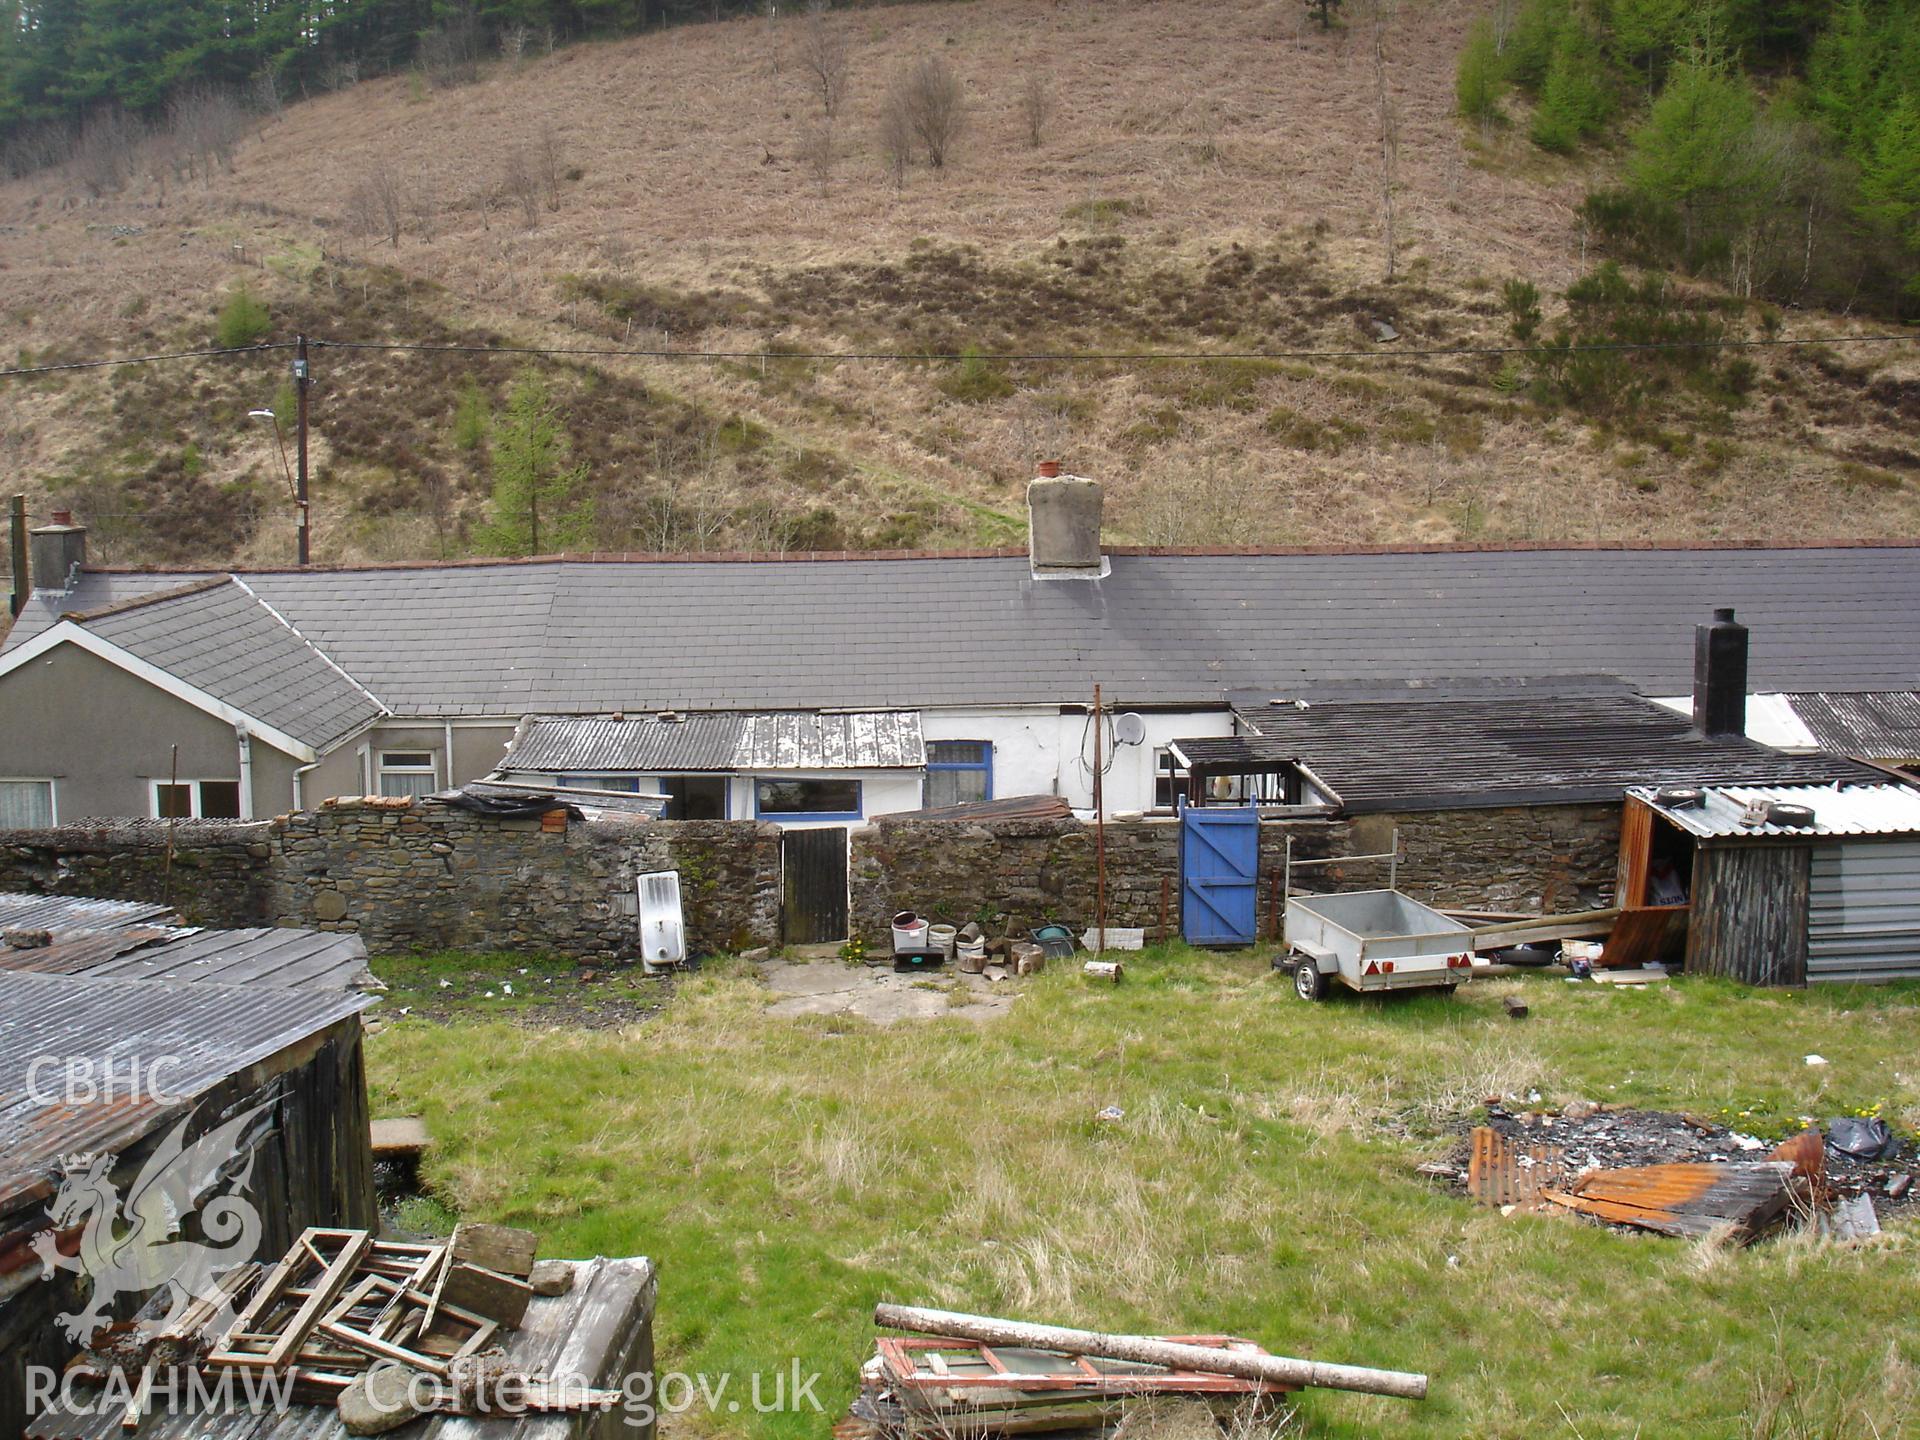 Colour digital photograph showing exterior rear view of cottages at Gelli Houses, Cymmer.